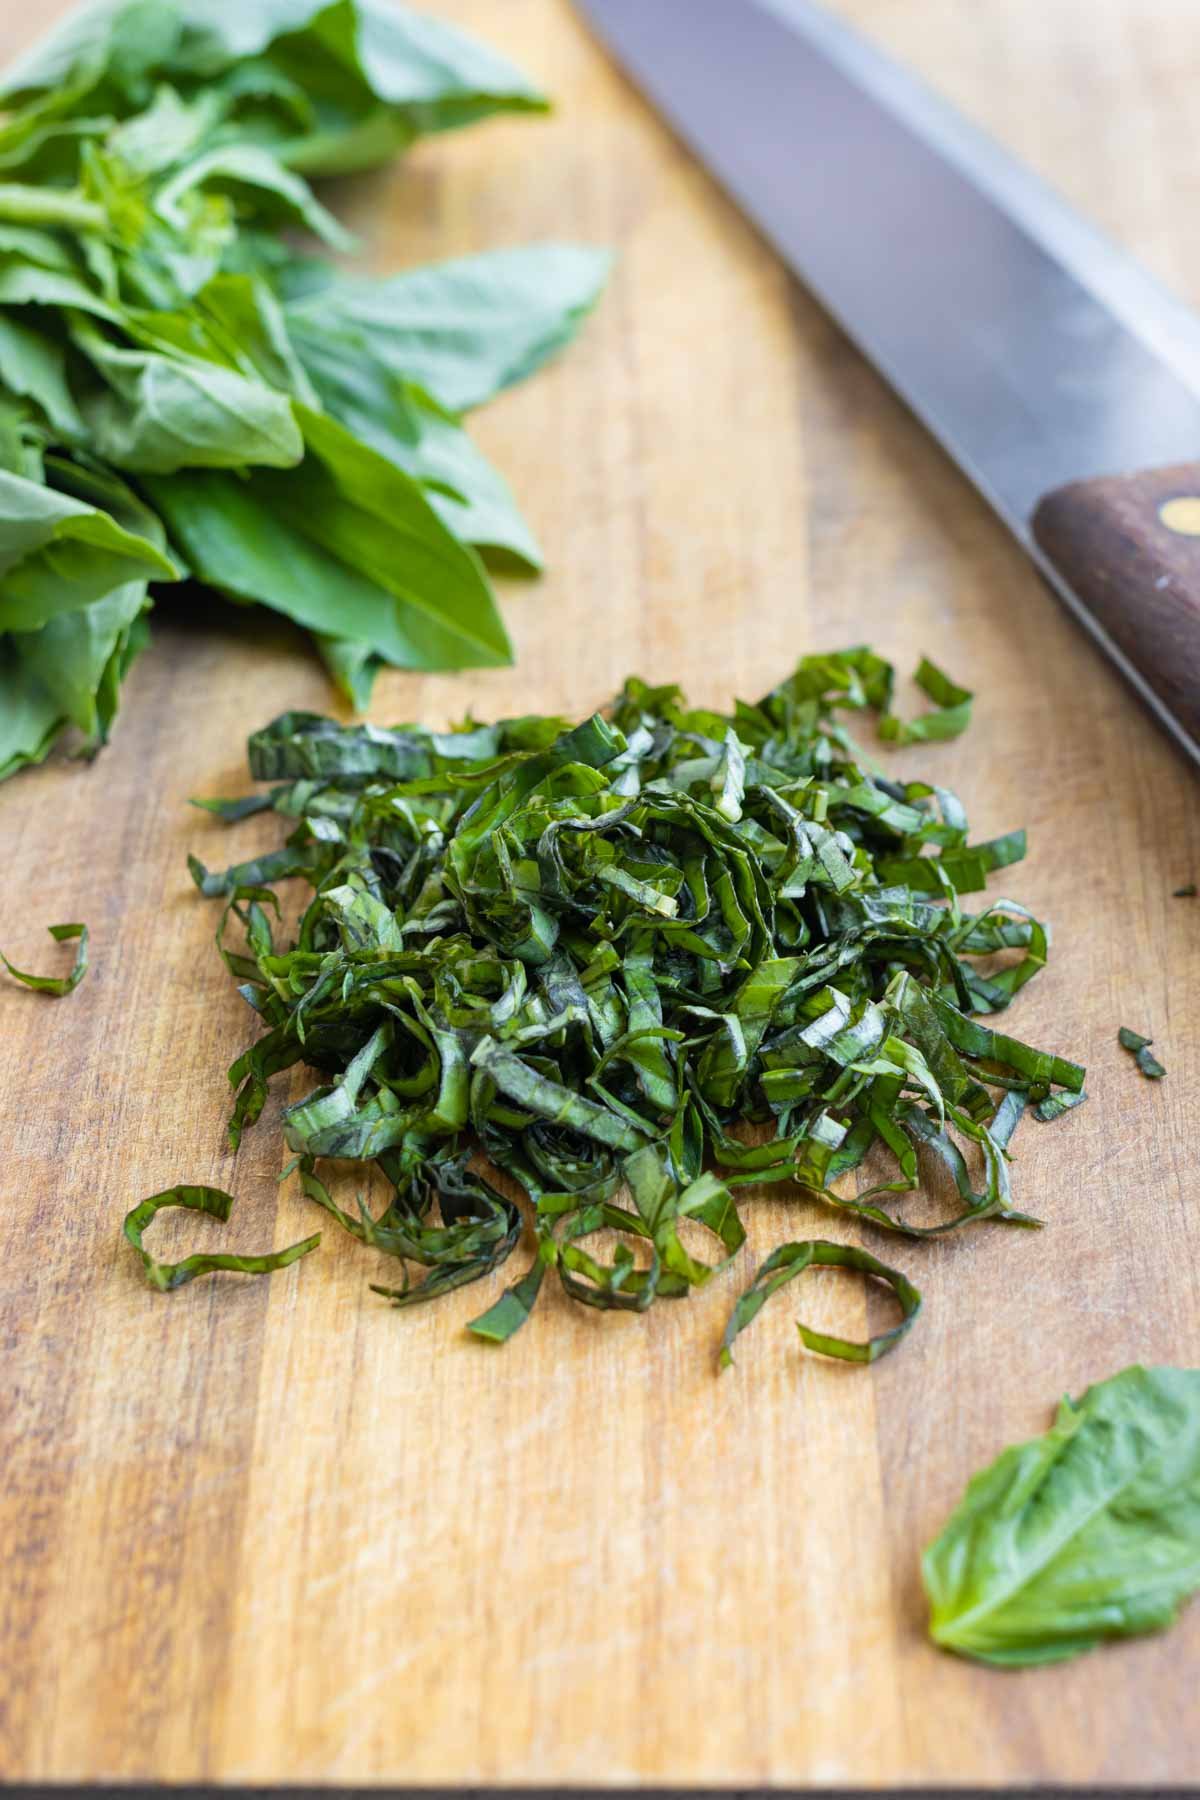 Sweet basil is perfect for a chiffonade cut.